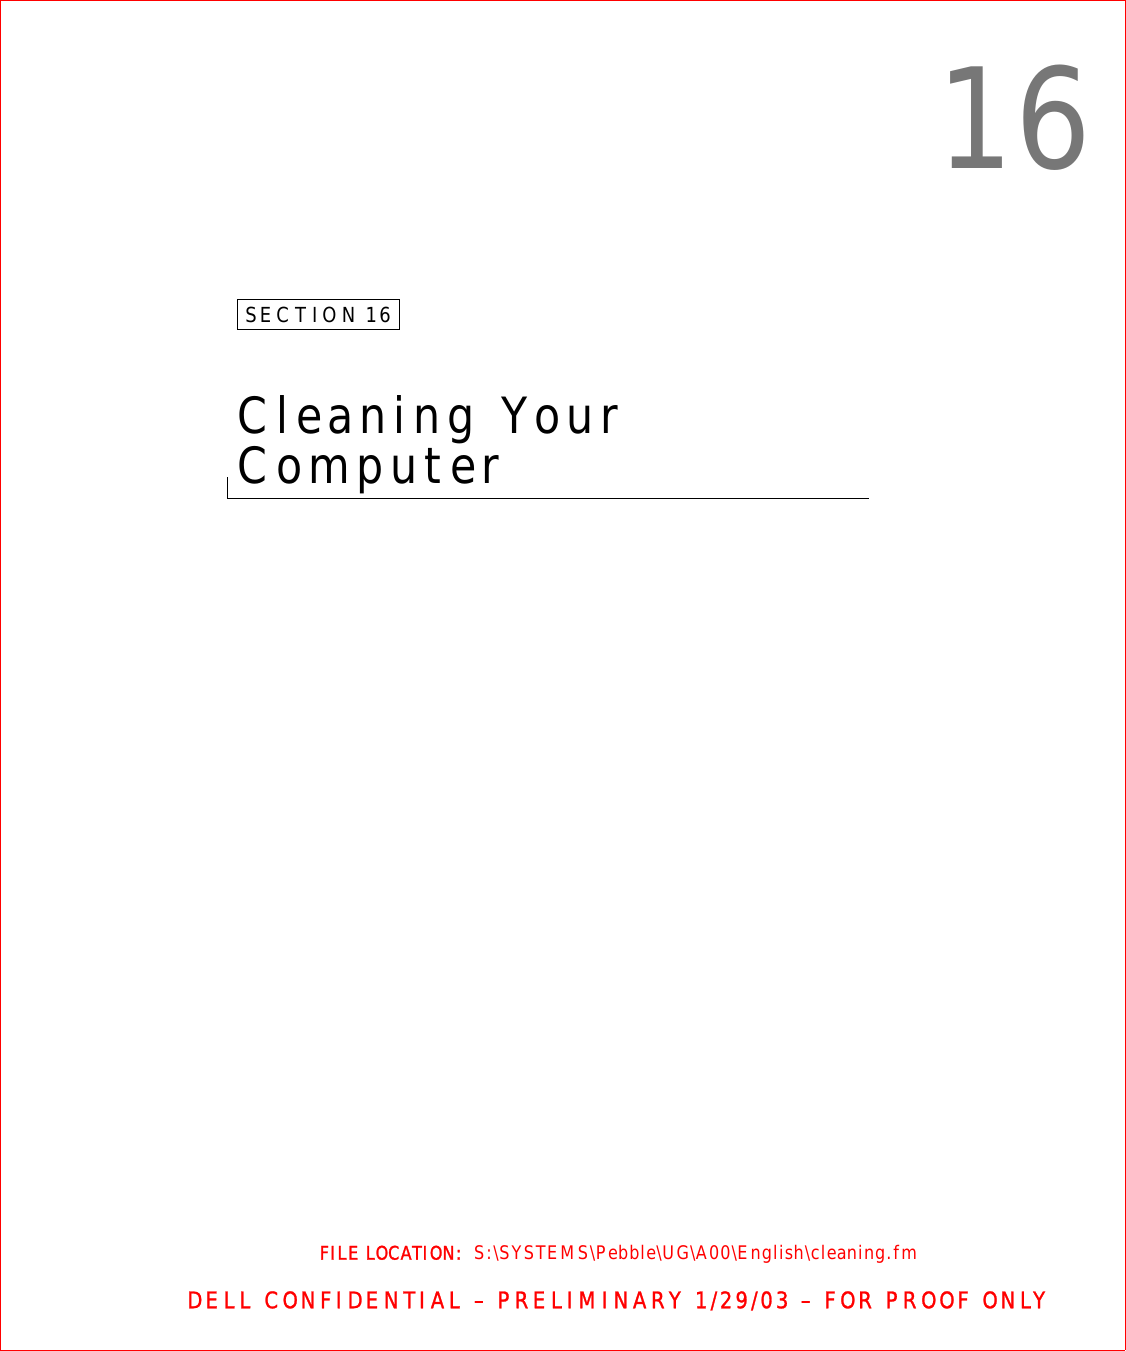 FILE LOCATION:  S:\SYSTEMS\Pebble\UG\A00\English\cleaning.fmDELL CONFIDENTIAL – PRELIMINARY 1/29/03 – FOR PROOF ONLY16SECTION 16Cleaning Your Computer 